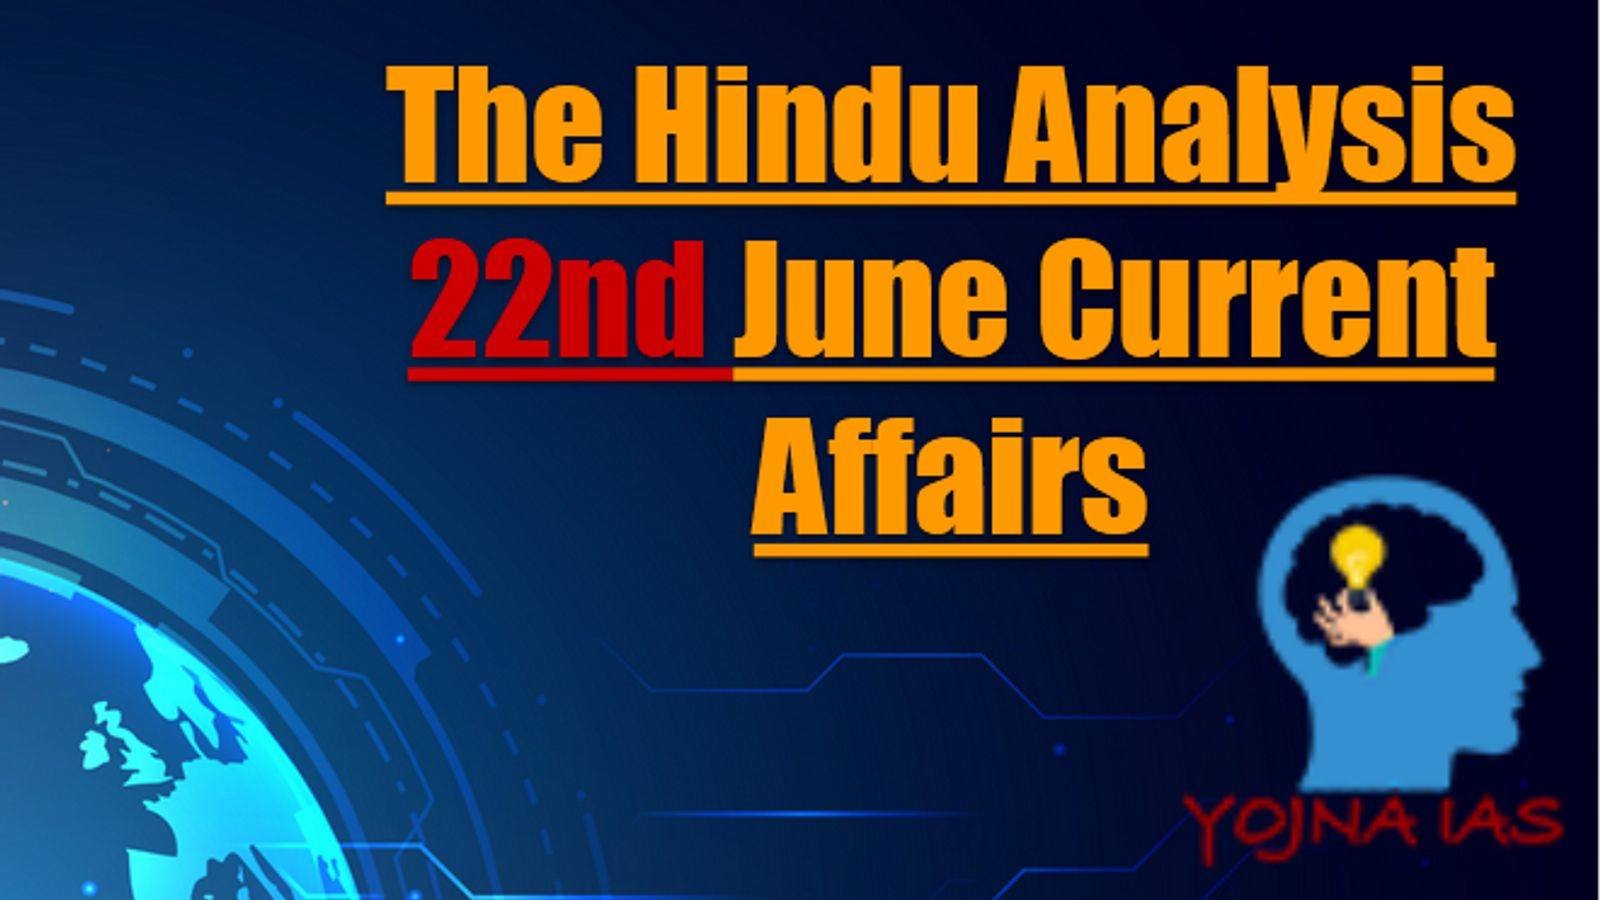 Today Current Affairs 22nd June